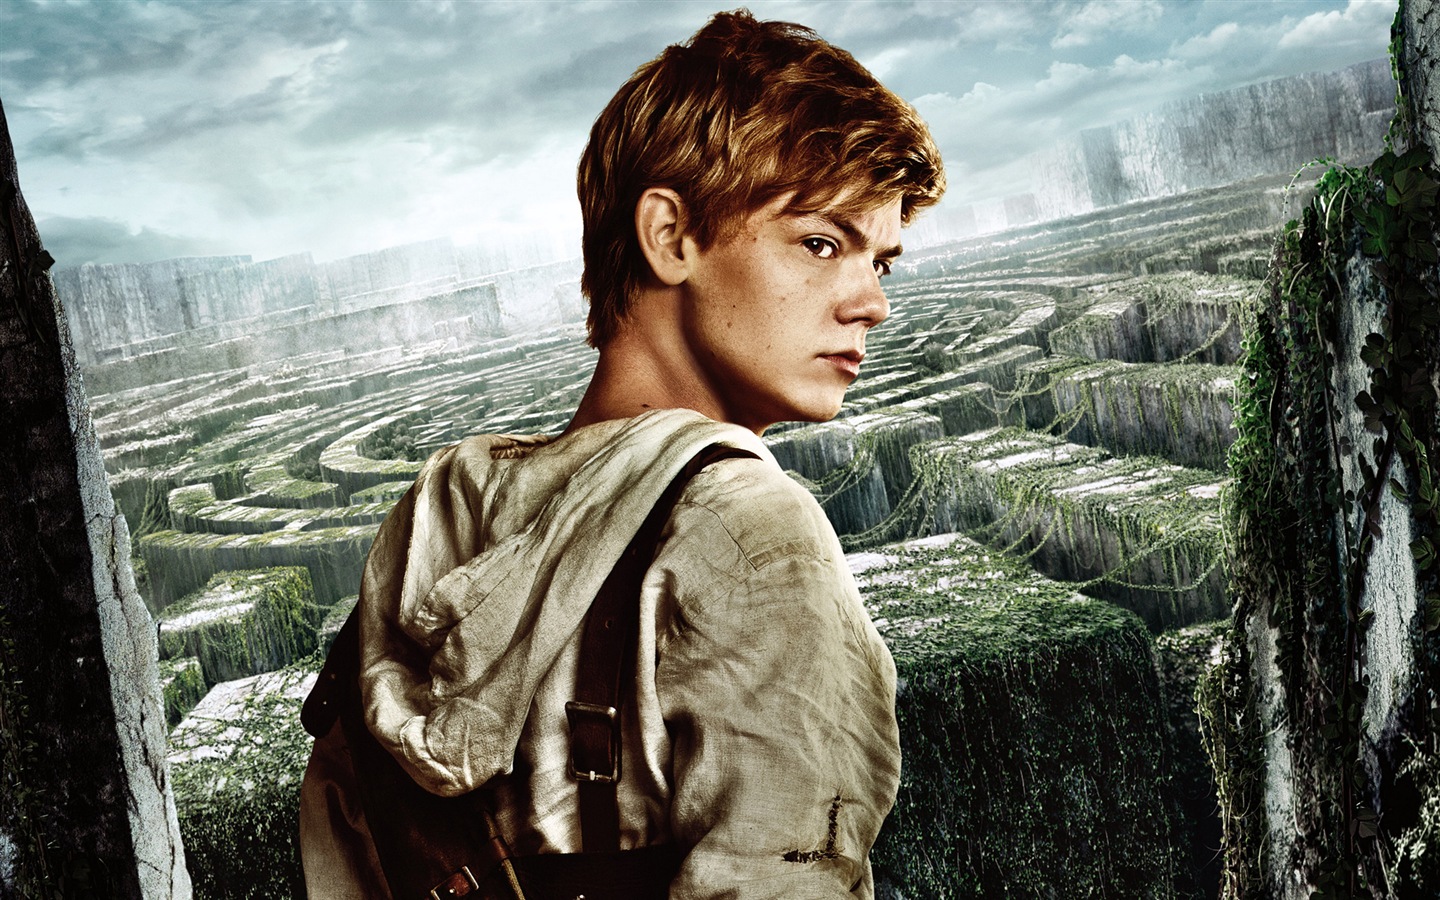 The Maze Runner HD movie wallpapers #8 - 1440x900